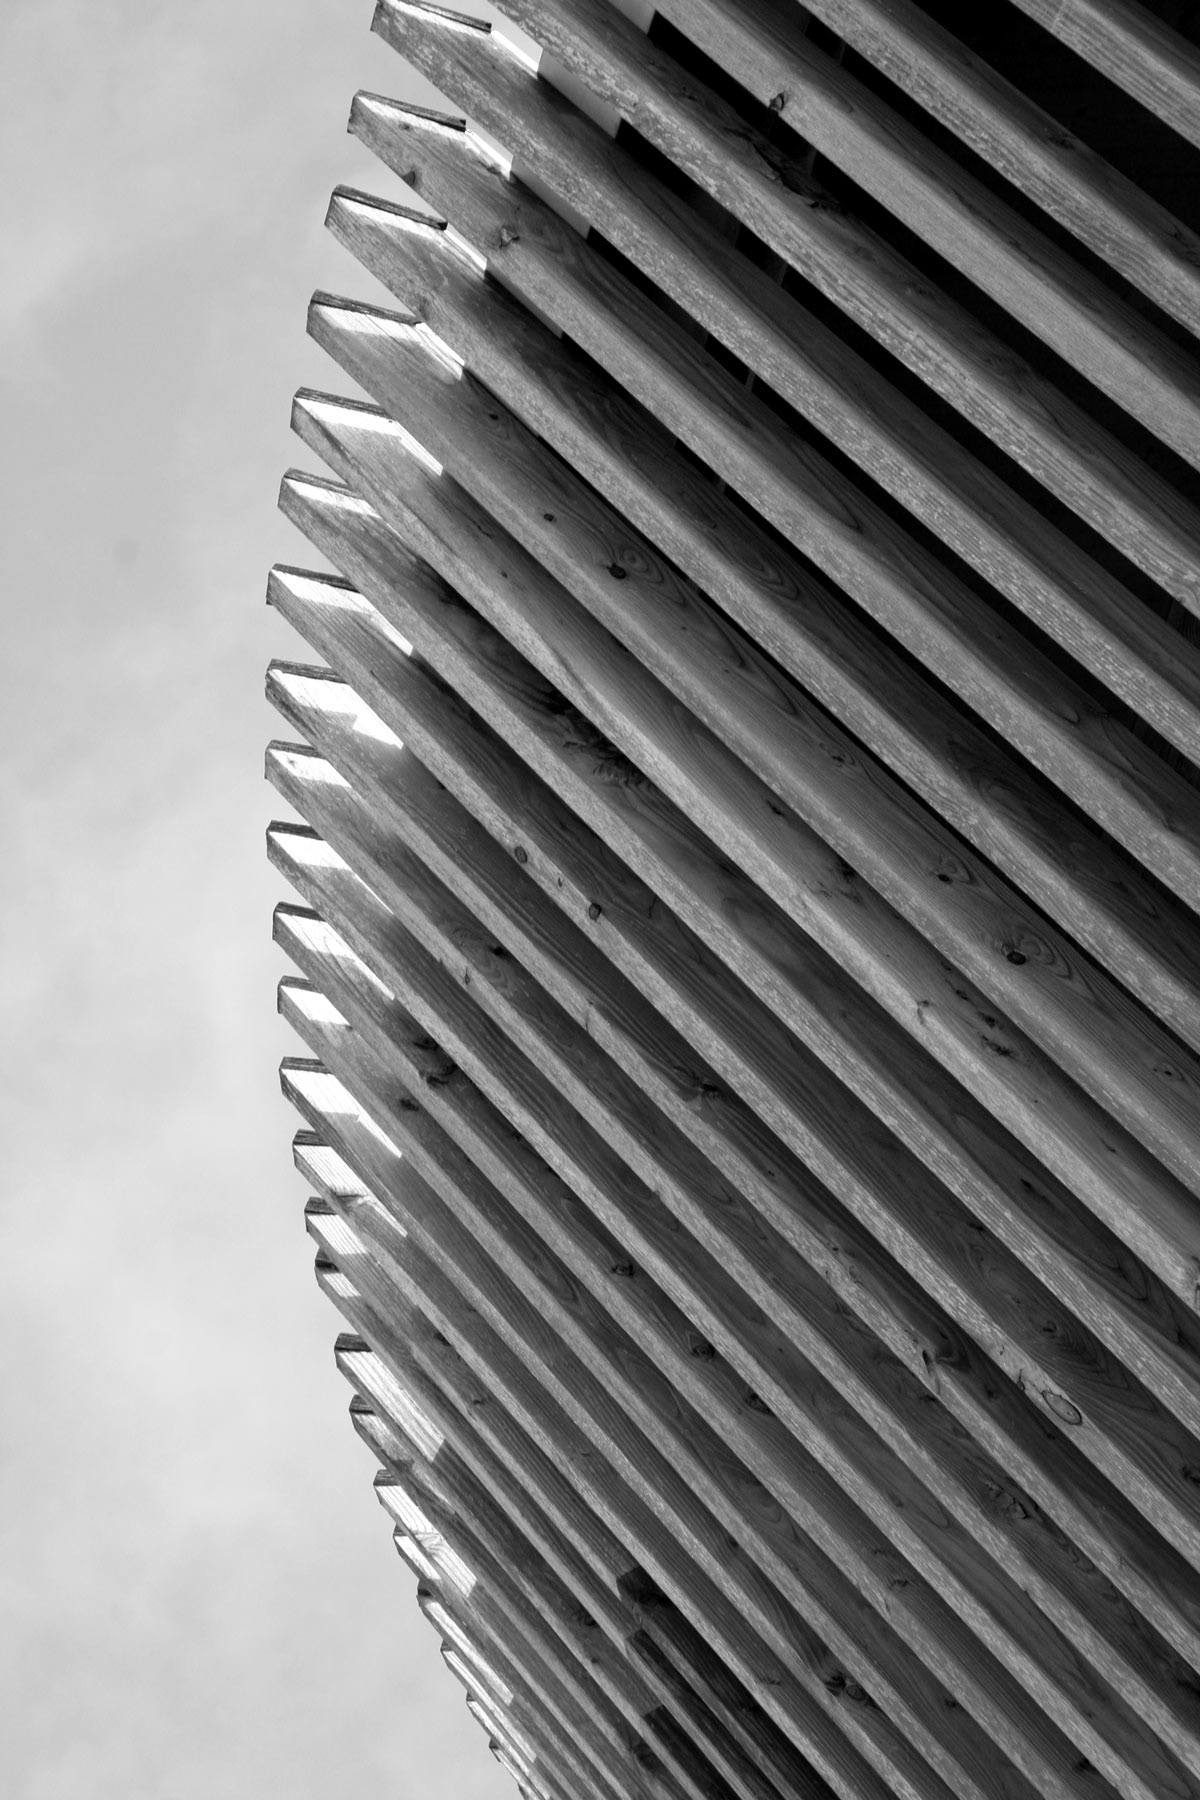 Abstract Architecture abstract photography archi photography B&W Architecture black and white city buildings lines and repetition minimal architecture modern architecture photo skyscraper photos